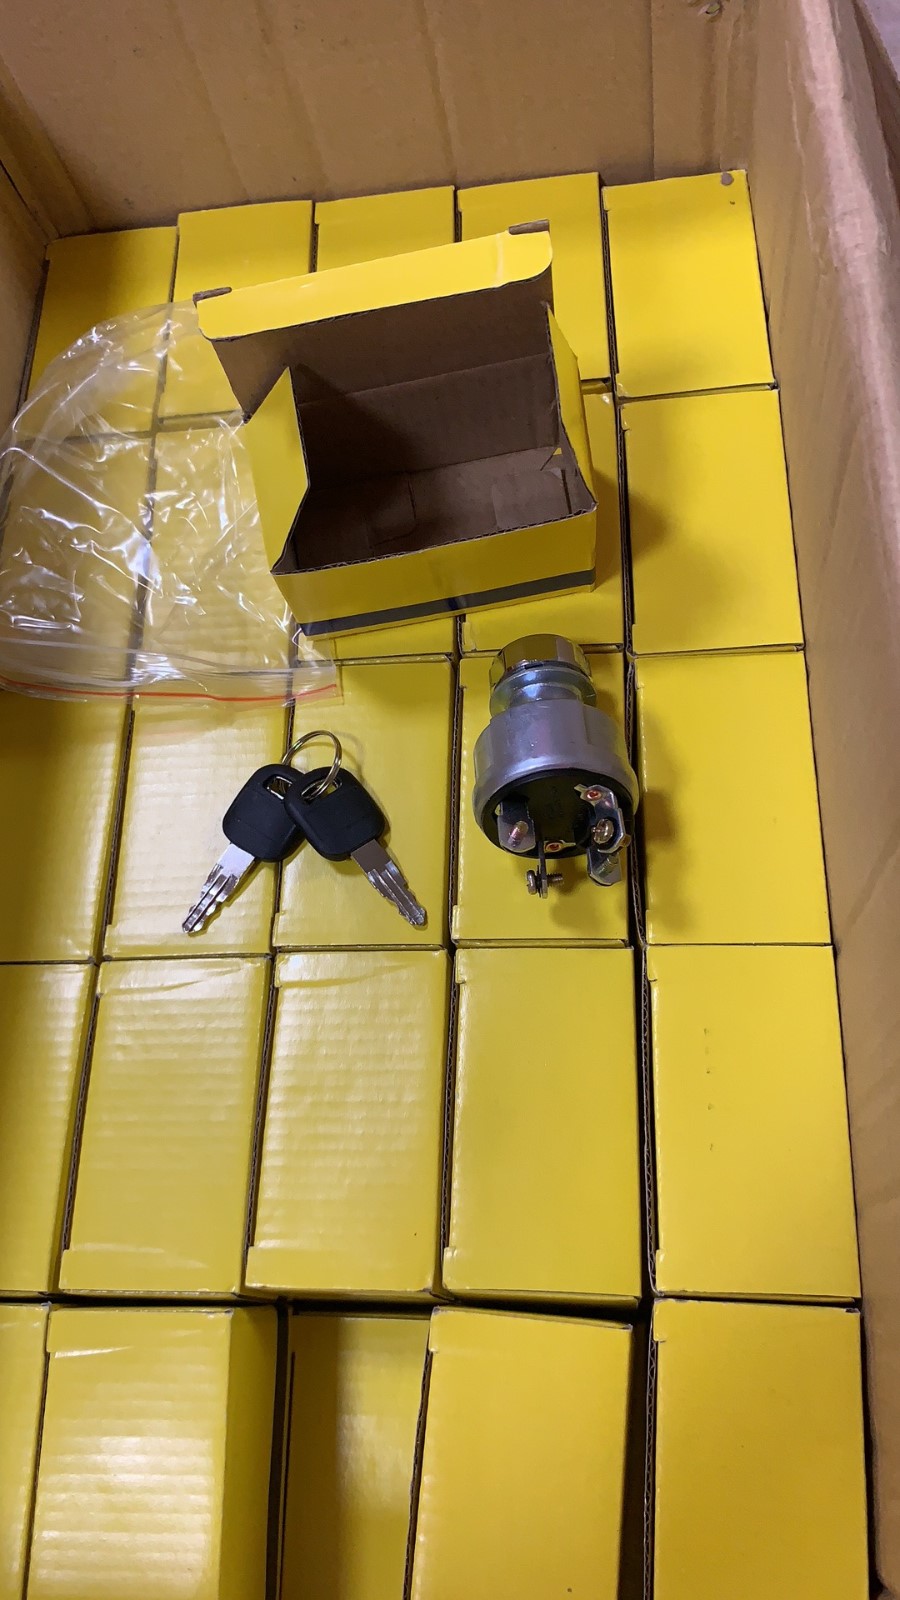 150pcs Ignition Switches shipped to Germany